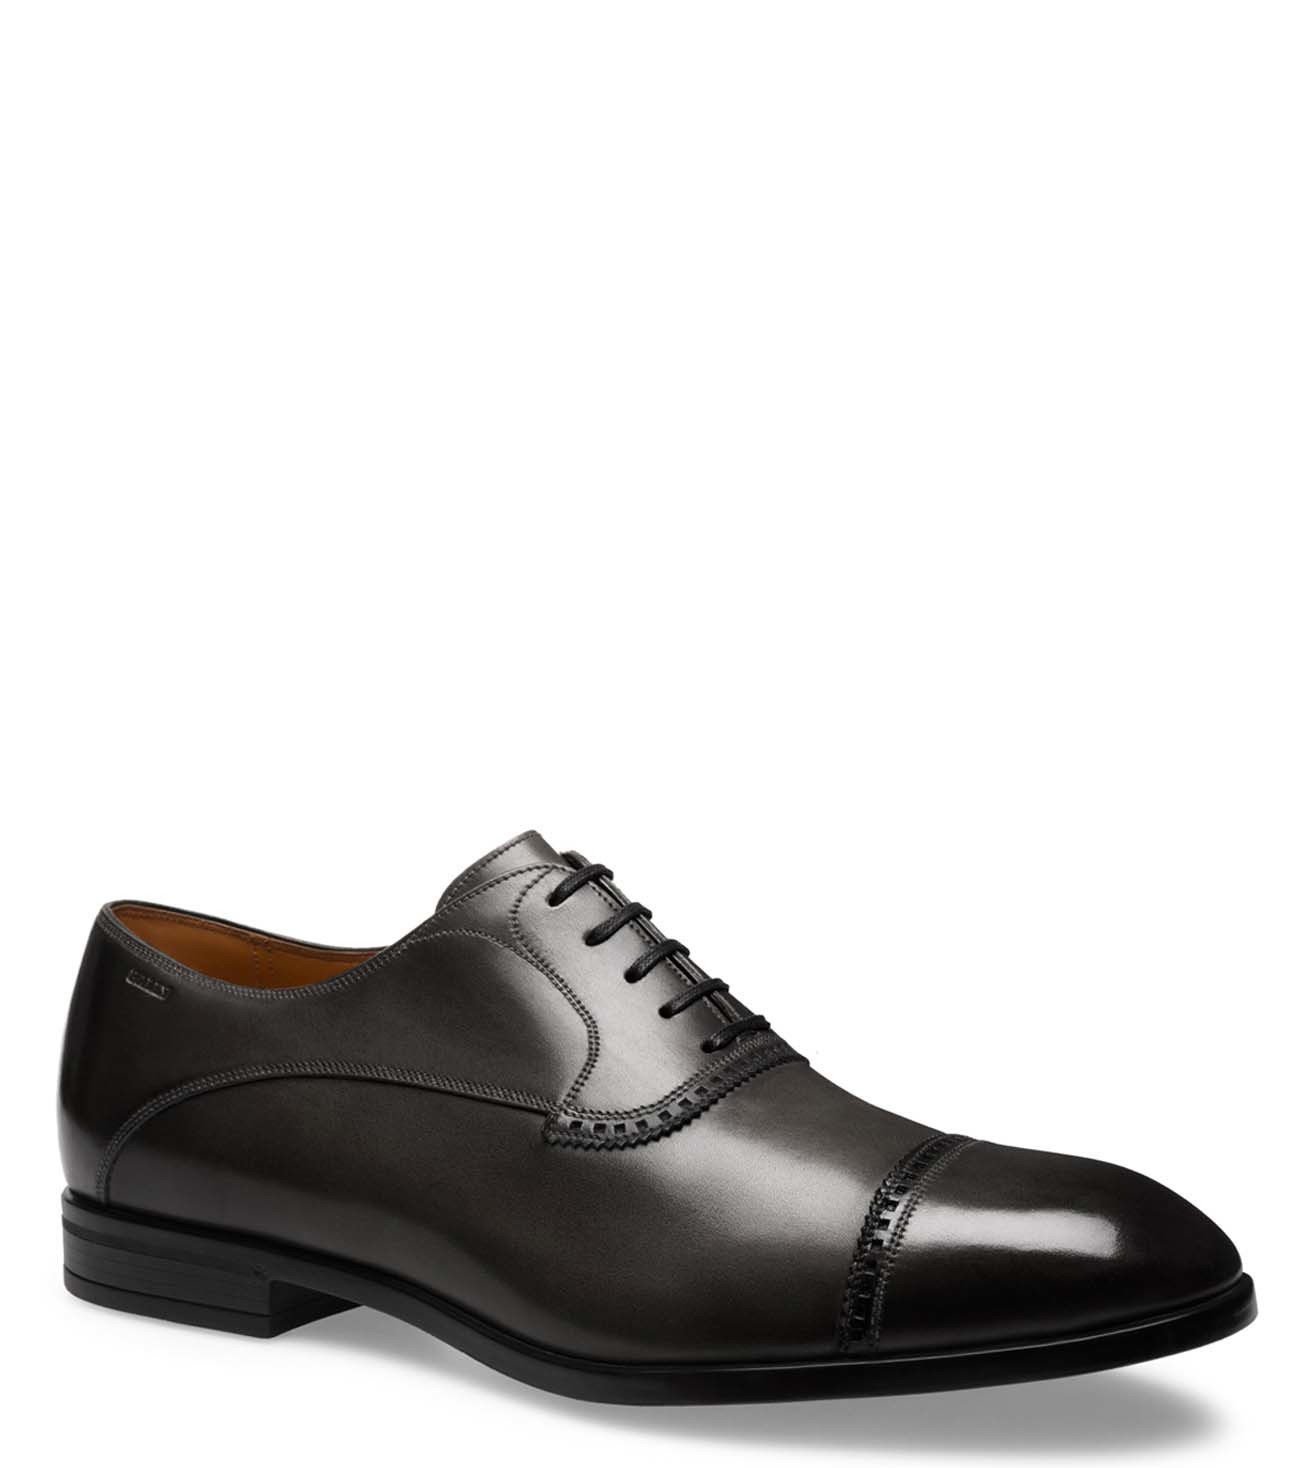 bally shoes online